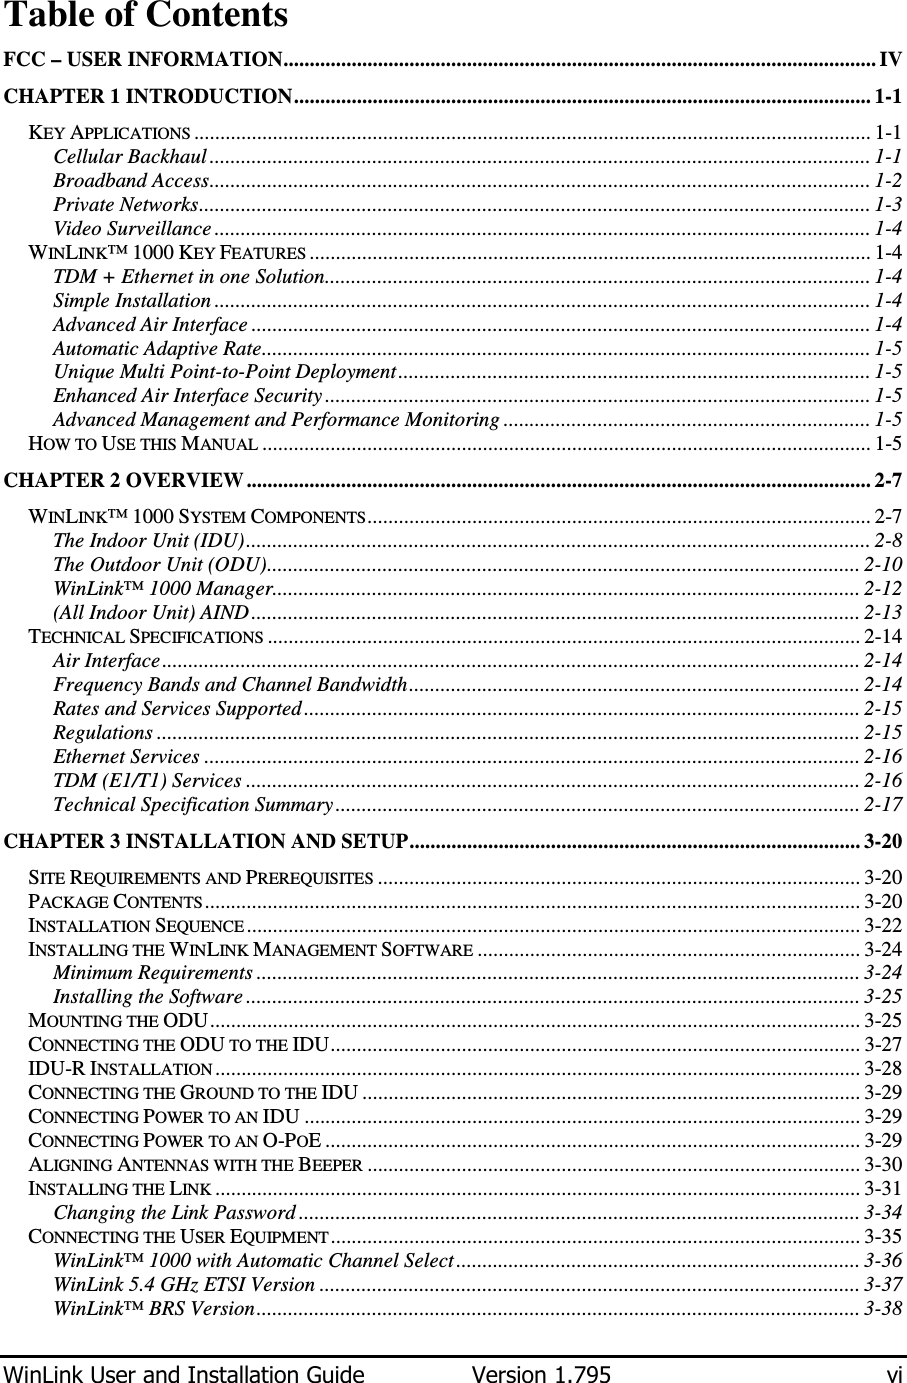  WinLink User and Installation Guide  Version 1.795  vi  Table of Contents FCC – USER INFORMATION................................................................................................................. IV CHAPTER 1 INTRODUCTION.............................................................................................................. 1-1 KEY APPLICATIONS ................................................................................................................................. 1-1 Cellular Backhaul .............................................................................................................................. 1-1 Broadband Access.............................................................................................................................. 1-2 Private Networks................................................................................................................................ 1-3 Video Surveillance ............................................................................................................................. 1-4 WINLINK™ 1000 KEY FEATURES ........................................................................................................... 1-4 TDM + Ethernet in one Solution........................................................................................................ 1-4 Simple Installation ............................................................................................................................. 1-4 Advanced Air Interface ...................................................................................................................... 1-4 Automatic Adaptive Rate.................................................................................................................... 1-5 Unique Multi Point-to-Point Deployment.......................................................................................... 1-5 Enhanced Air Interface Security ........................................................................................................ 1-5 Advanced Management and Performance Monitoring ...................................................................... 1-5 HOW TO USE THIS MANUAL .................................................................................................................... 1-5 CHAPTER 2 OVERVIEW ....................................................................................................................... 2-7 WINLINK™ 1000 SYSTEM COMPONENTS................................................................................................ 2-7 The Indoor Unit (IDU)....................................................................................................................... 2-8 The Outdoor Unit (ODU)................................................................................................................. 2-10 WinLink™ 1000 Manager................................................................................................................ 2-12 (All Indoor Unit) AIND.................................................................................................................... 2-13 TECHNICAL SPECIFICATIONS ................................................................................................................. 2-14 Air Interface..................................................................................................................................... 2-14 Frequency Bands and Channel Bandwidth...................................................................................... 2-14 Rates and Services Supported .......................................................................................................... 2-15 Regulations ...................................................................................................................................... 2-15 Ethernet Services ............................................................................................................................. 2-16 TDM (E1/T1) Services ..................................................................................................................... 2-16 Technical Specification Summary.................................................................................................... 2-17 CHAPTER 3 INSTALLATION AND SETUP...................................................................................... 3-20 SITE REQUIREMENTS AND PREREQUISITES ............................................................................................ 3-20 PACKAGE CONTENTS............................................................................................................................. 3-20 INSTALLATION SEQUENCE ..................................................................................................................... 3-22 INSTALLING THE WINLINK MANAGEMENT SOFTWARE ......................................................................... 3-24 Minimum Requirements ................................................................................................................... 3-24 Installing the Software ..................................................................................................................... 3-25 MOUNTING THE ODU............................................................................................................................ 3-25 CONNECTING THE ODU TO THE IDU..................................................................................................... 3-27 IDU-R INSTALLATION ........................................................................................................................... 3-28 CONNECTING THE GROUND TO THE IDU ............................................................................................... 3-29 CONNECTING POWER TO AN IDU .......................................................................................................... 3-29 CONNECTING POWER TO AN O-POE ...................................................................................................... 3-29 ALIGNING ANTENNAS WITH THE BEEPER .............................................................................................. 3-30 INSTALLING THE LINK ........................................................................................................................... 3-31 Changing the Link Password ........................................................................................................... 3-34 CONNECTING THE USER EQUIPMENT..................................................................................................... 3-35 WinLink™ 1000 with Automatic Channel Select............................................................................. 3-36 WinLink 5.4 GHz ETSI Version ....................................................................................................... 3-37 WinLink™ BRS Version................................................................................................................... 3-38 